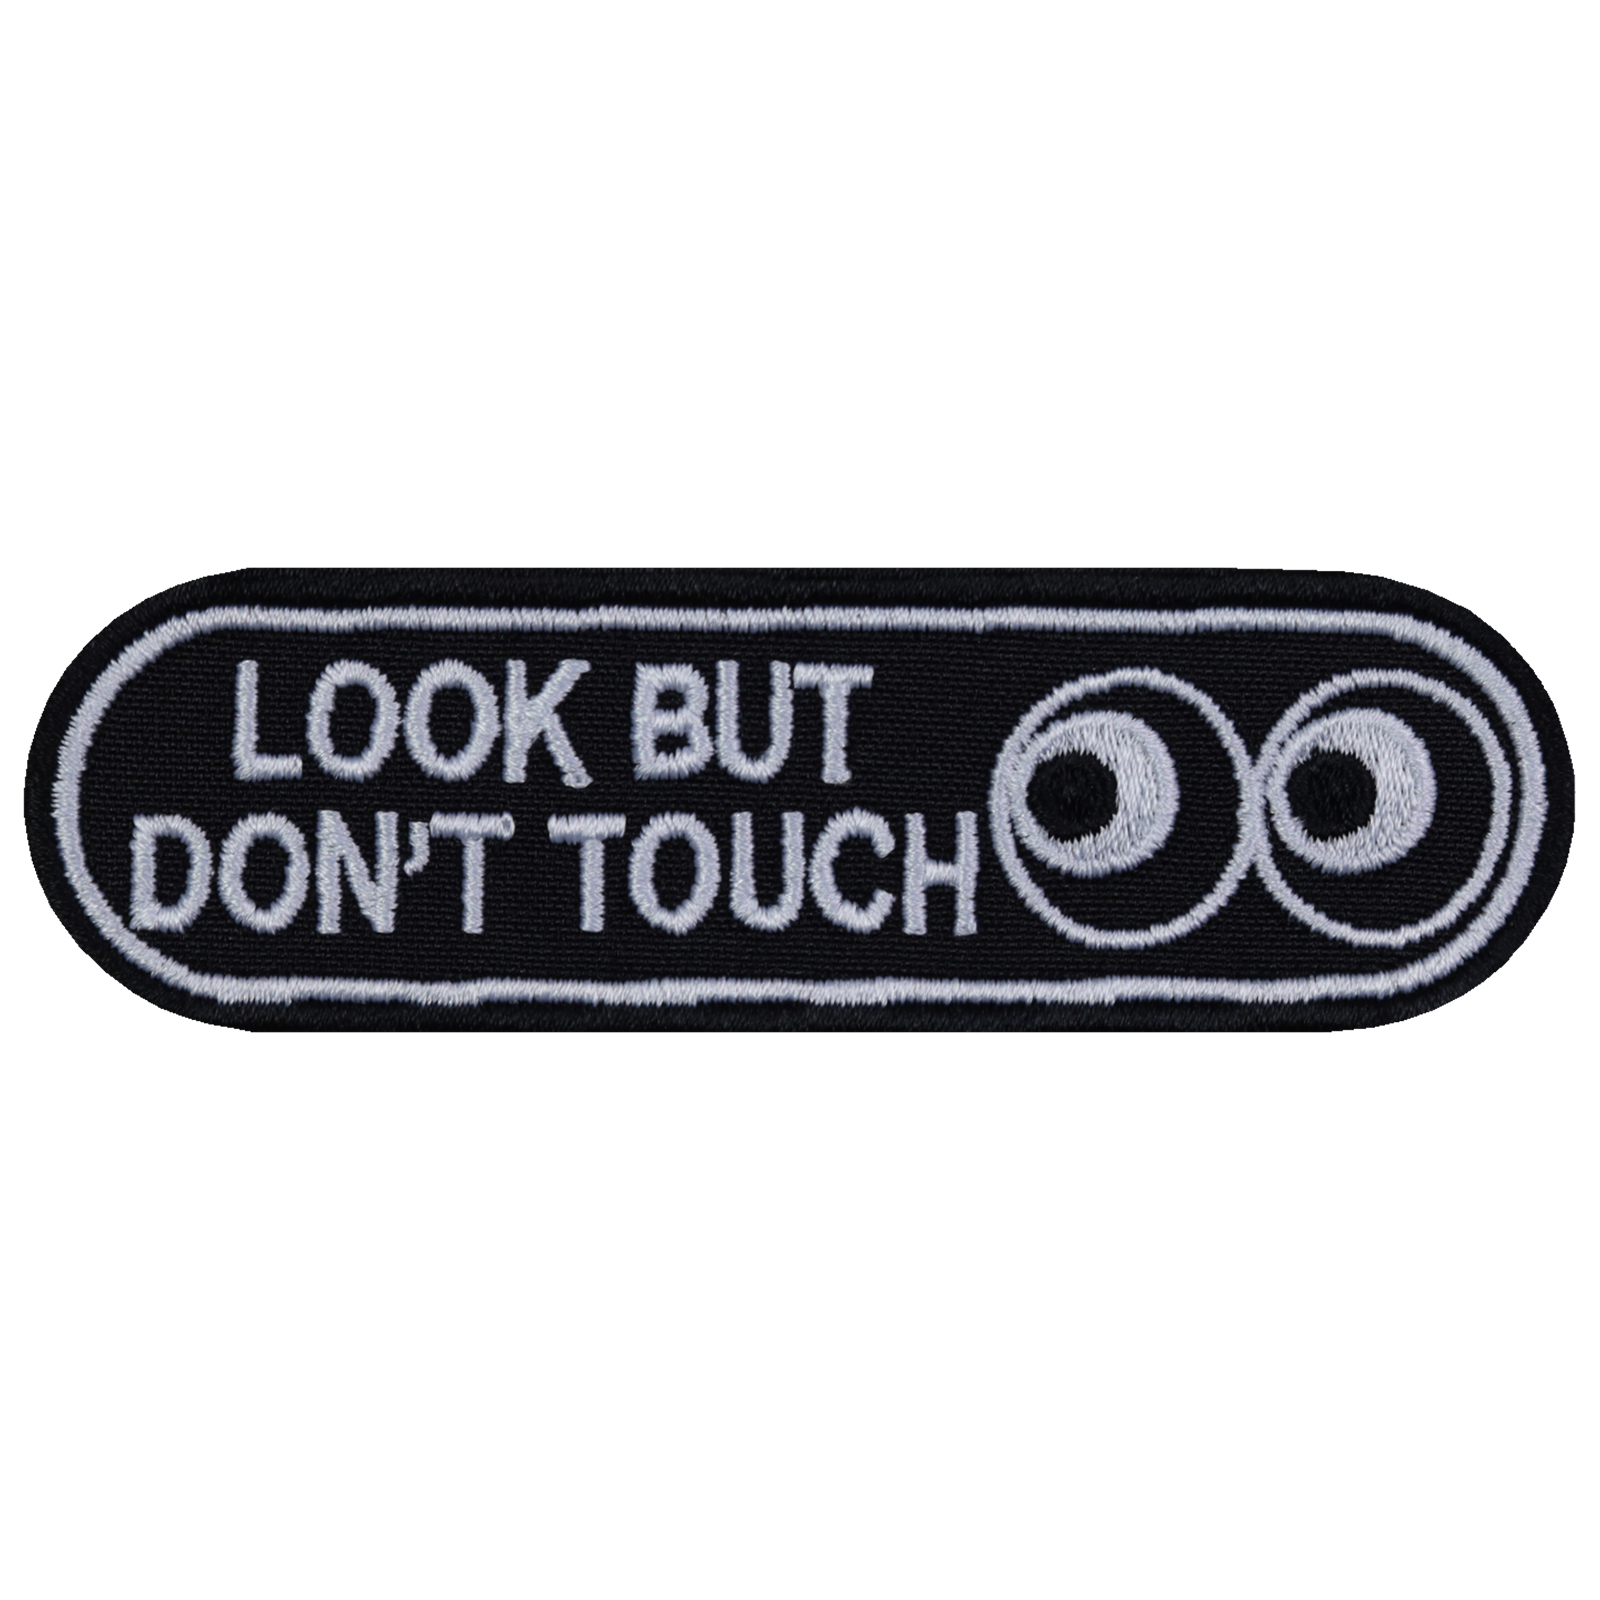 Look but don't touch - Patch